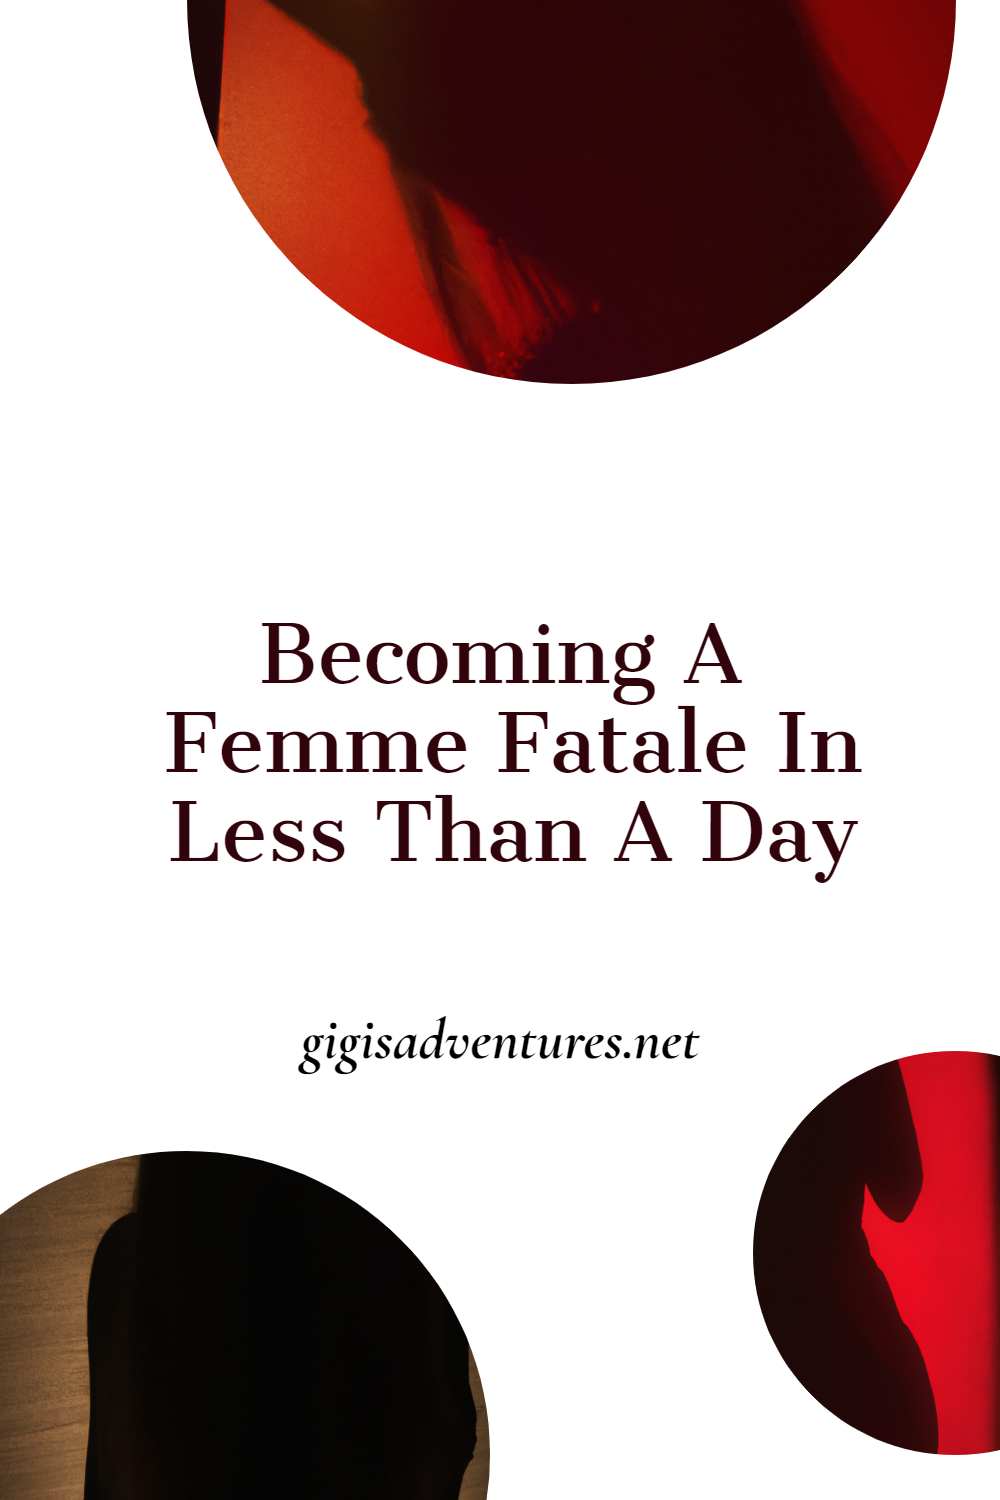 Becoming A Femme Fatale In Less Than A Day